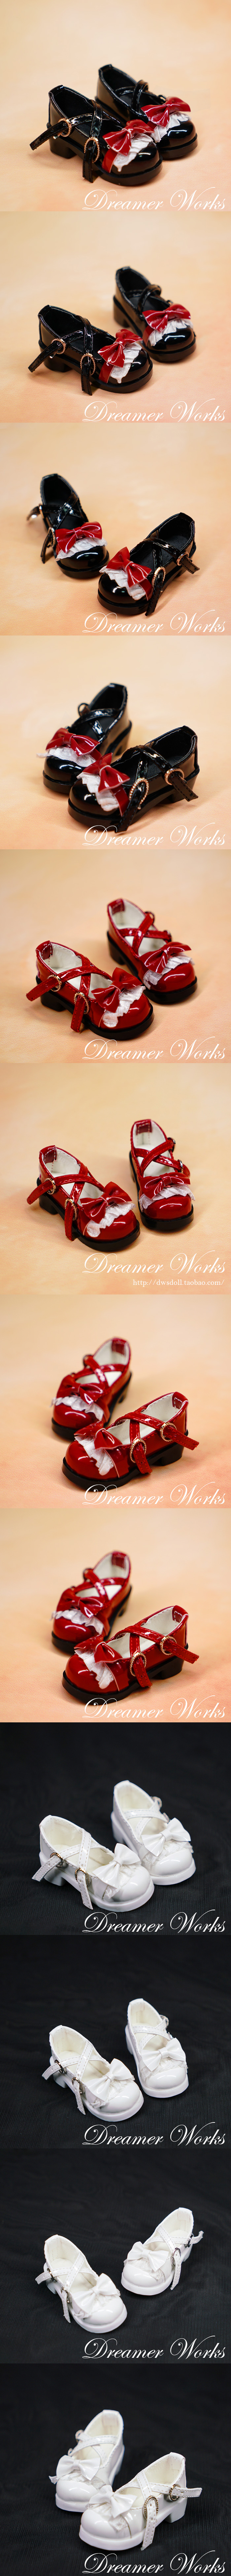 1/4 Sweet Girl Shoes for MSD